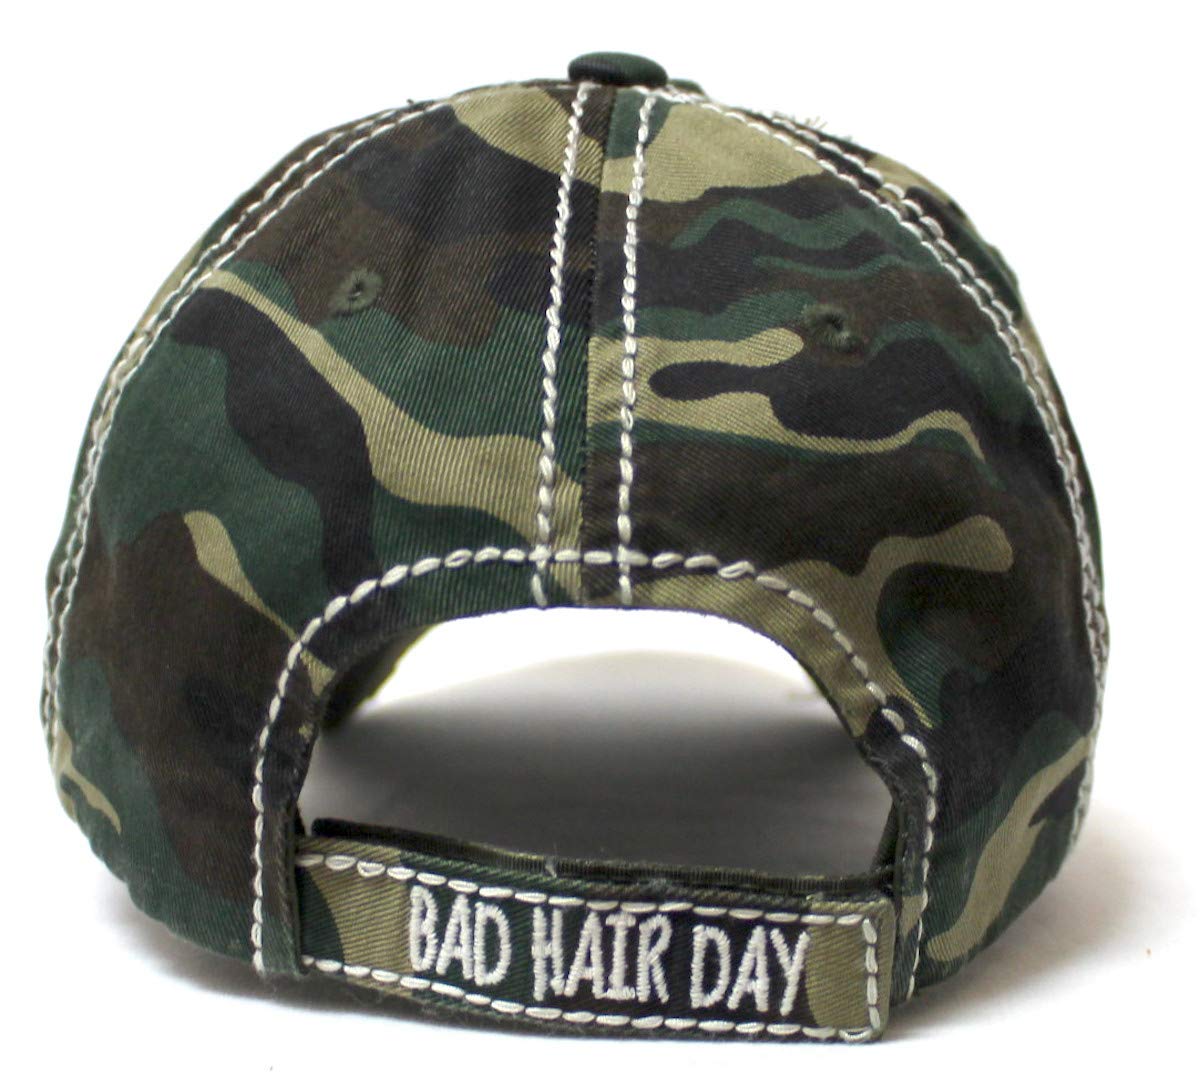 Women's Hat Bad Hair Day Embroidery Patch on Distressed Cap, Vintage Army Camo - Caps 'N Vintage 